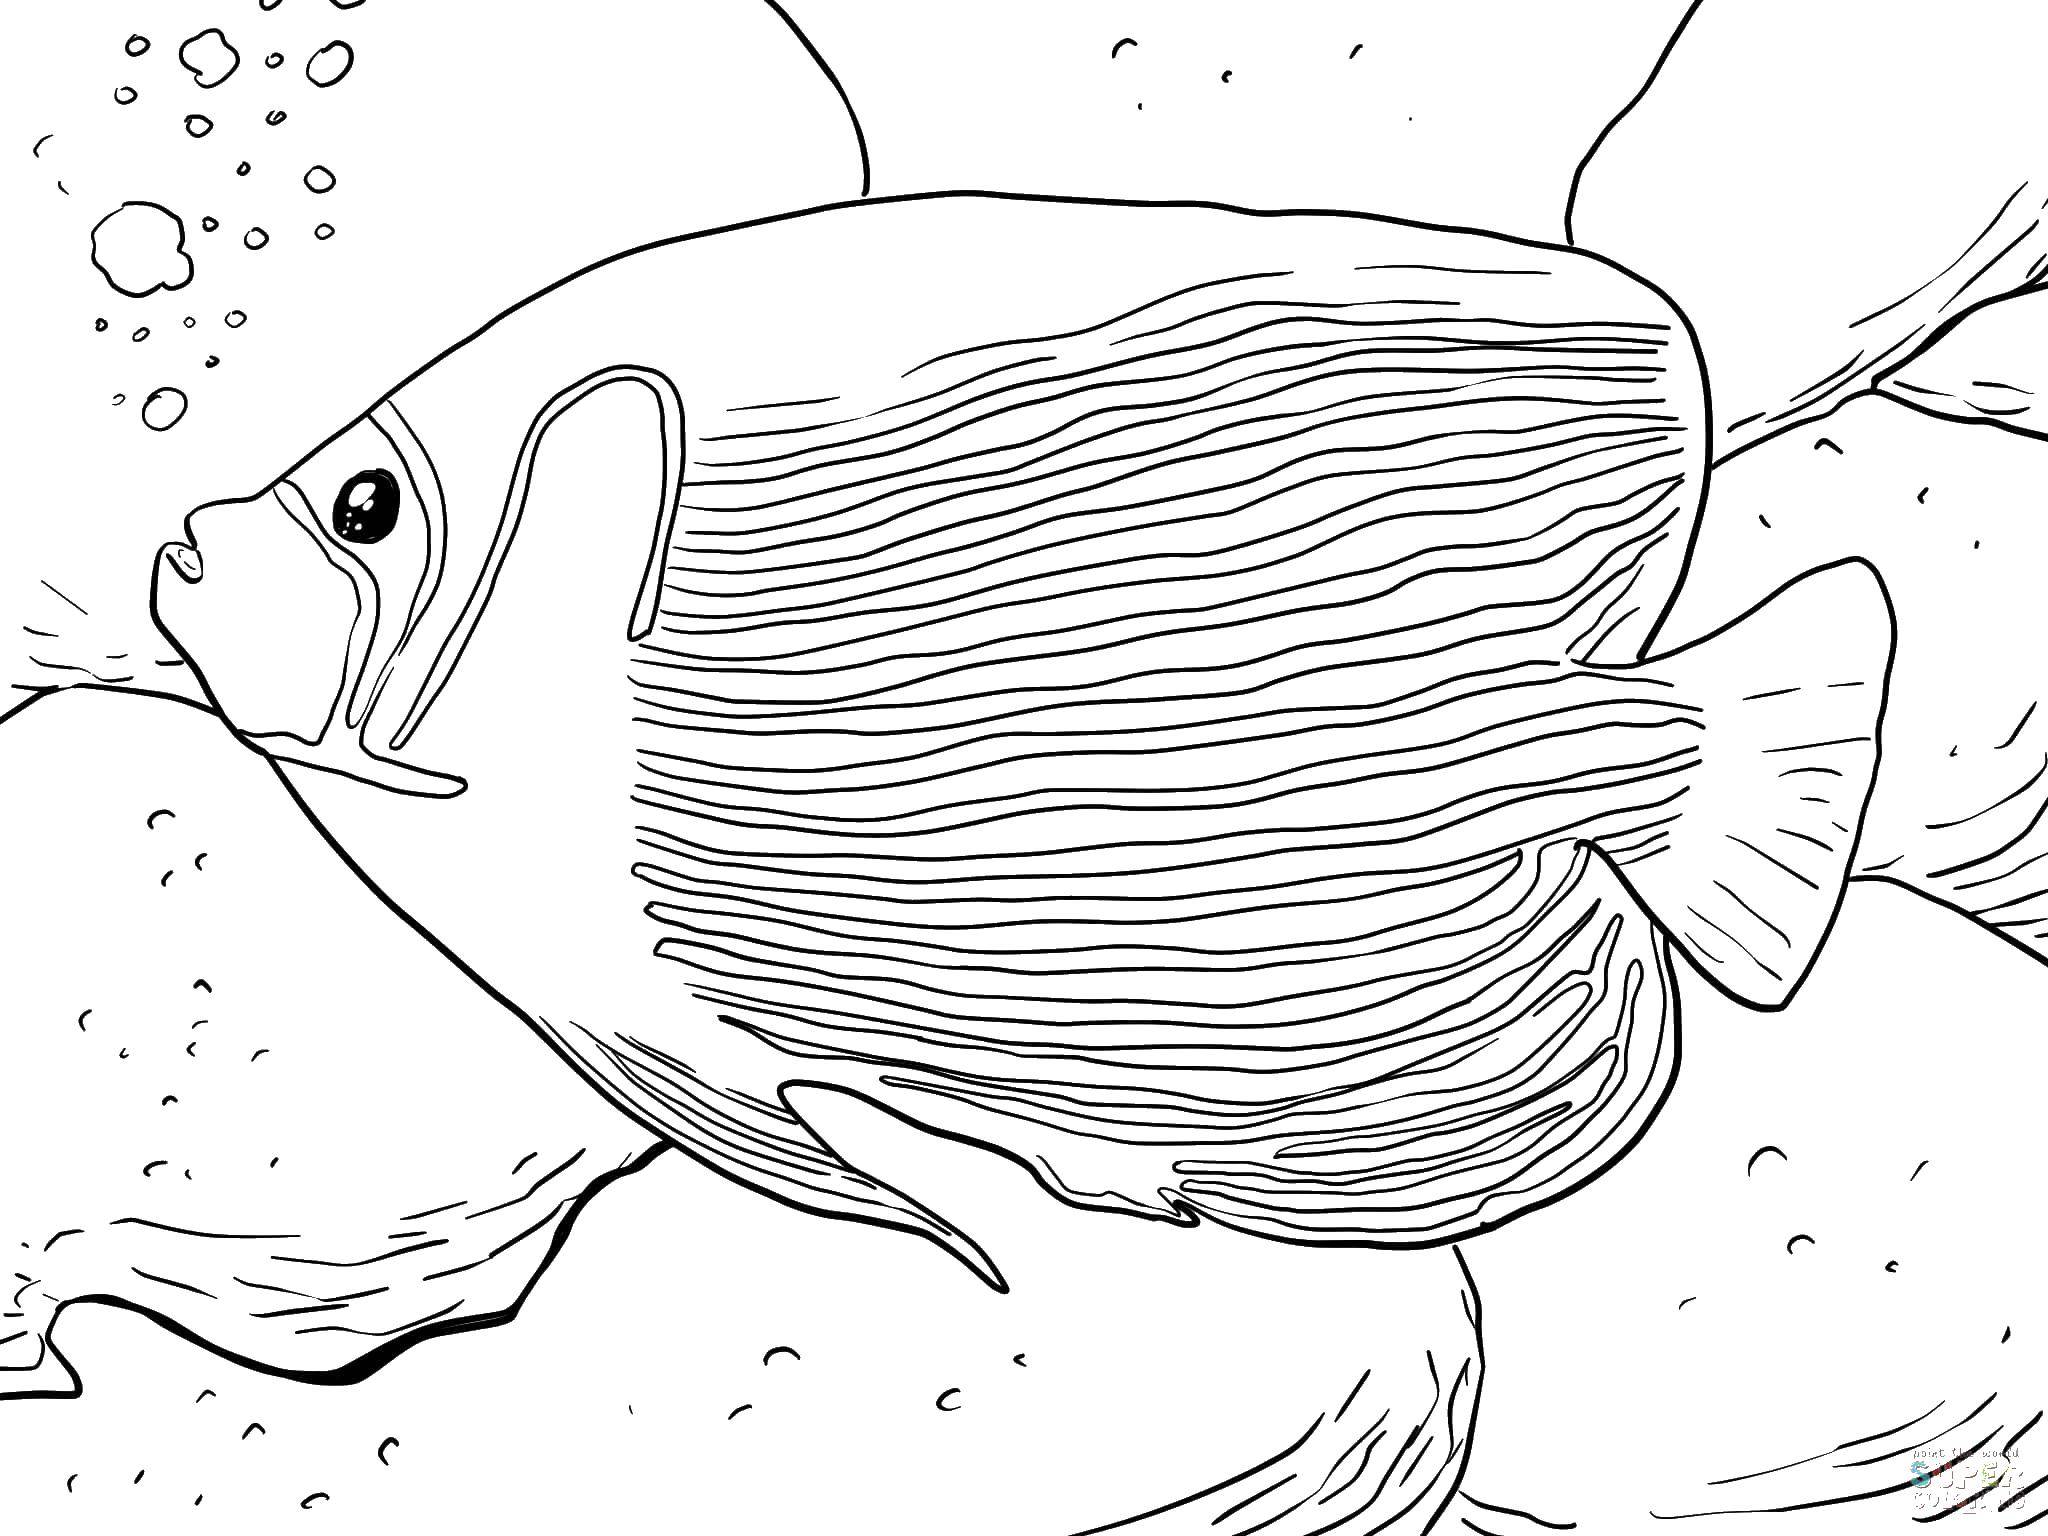 Coloring Striped fish. Category fish. Tags:  fish, sea, striped.